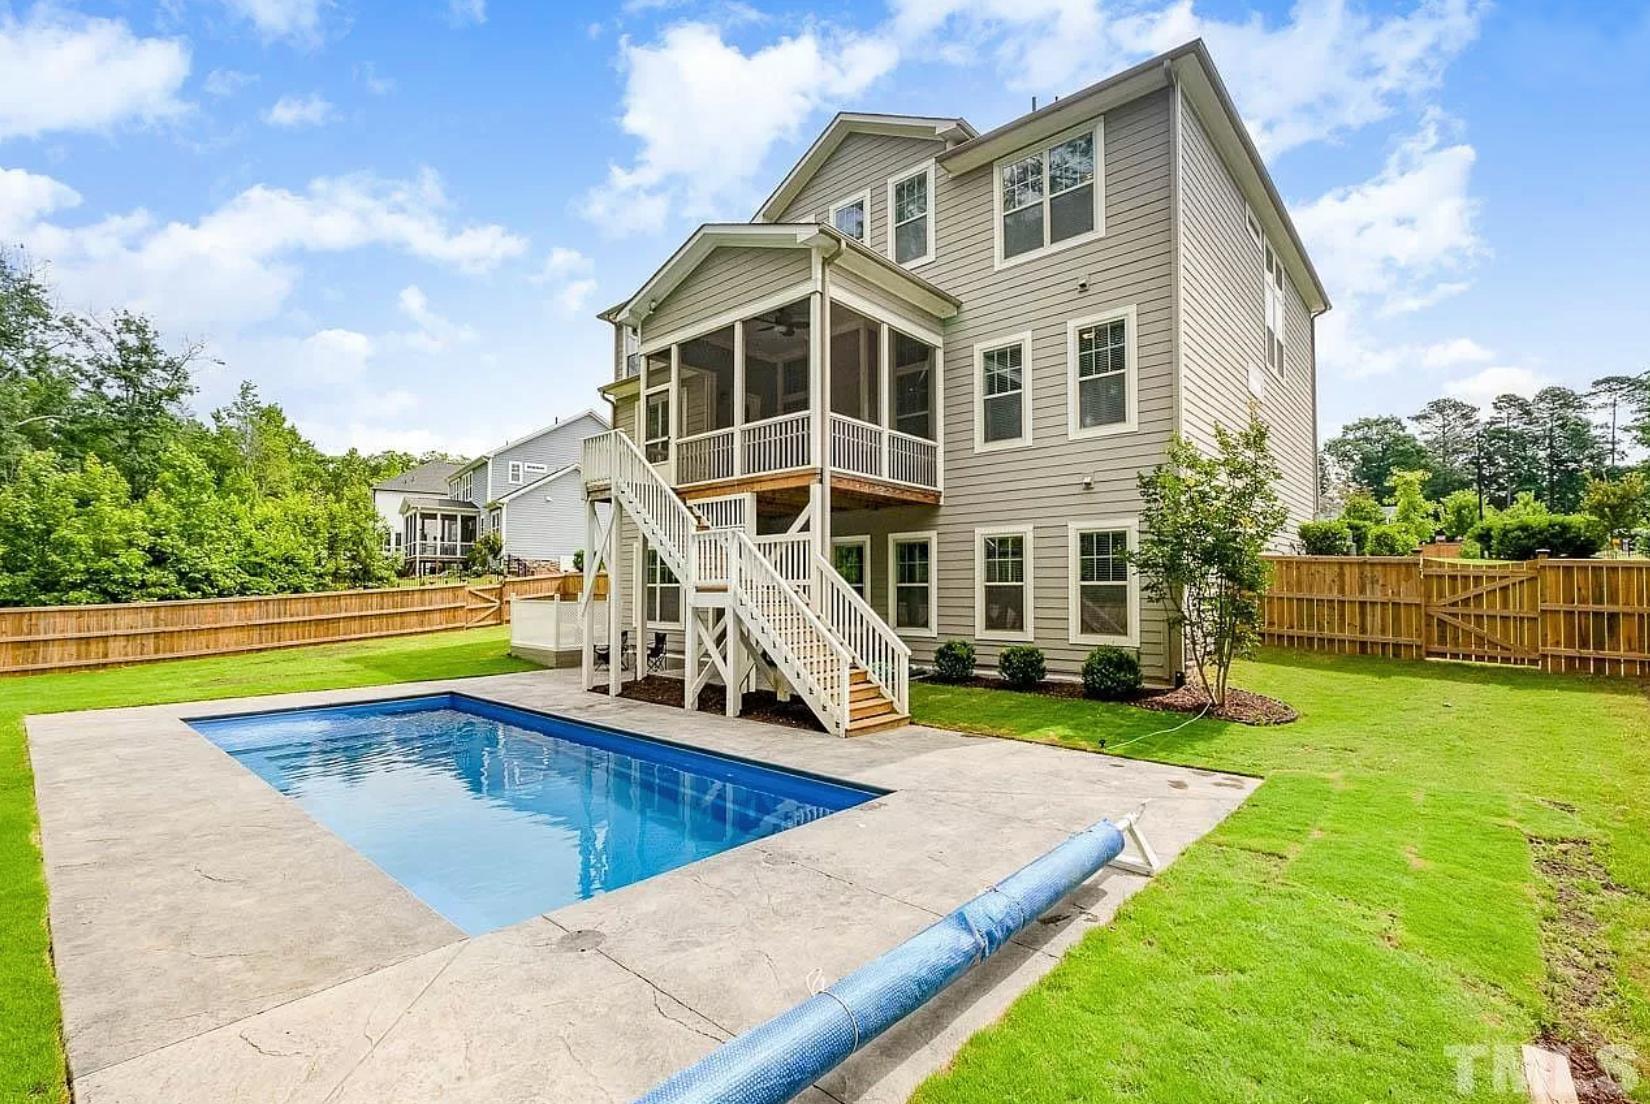 A large, green backyard with privacy fence, swimming pool, and a gray three-story home with white trim, back deck, and outdoor staircase.